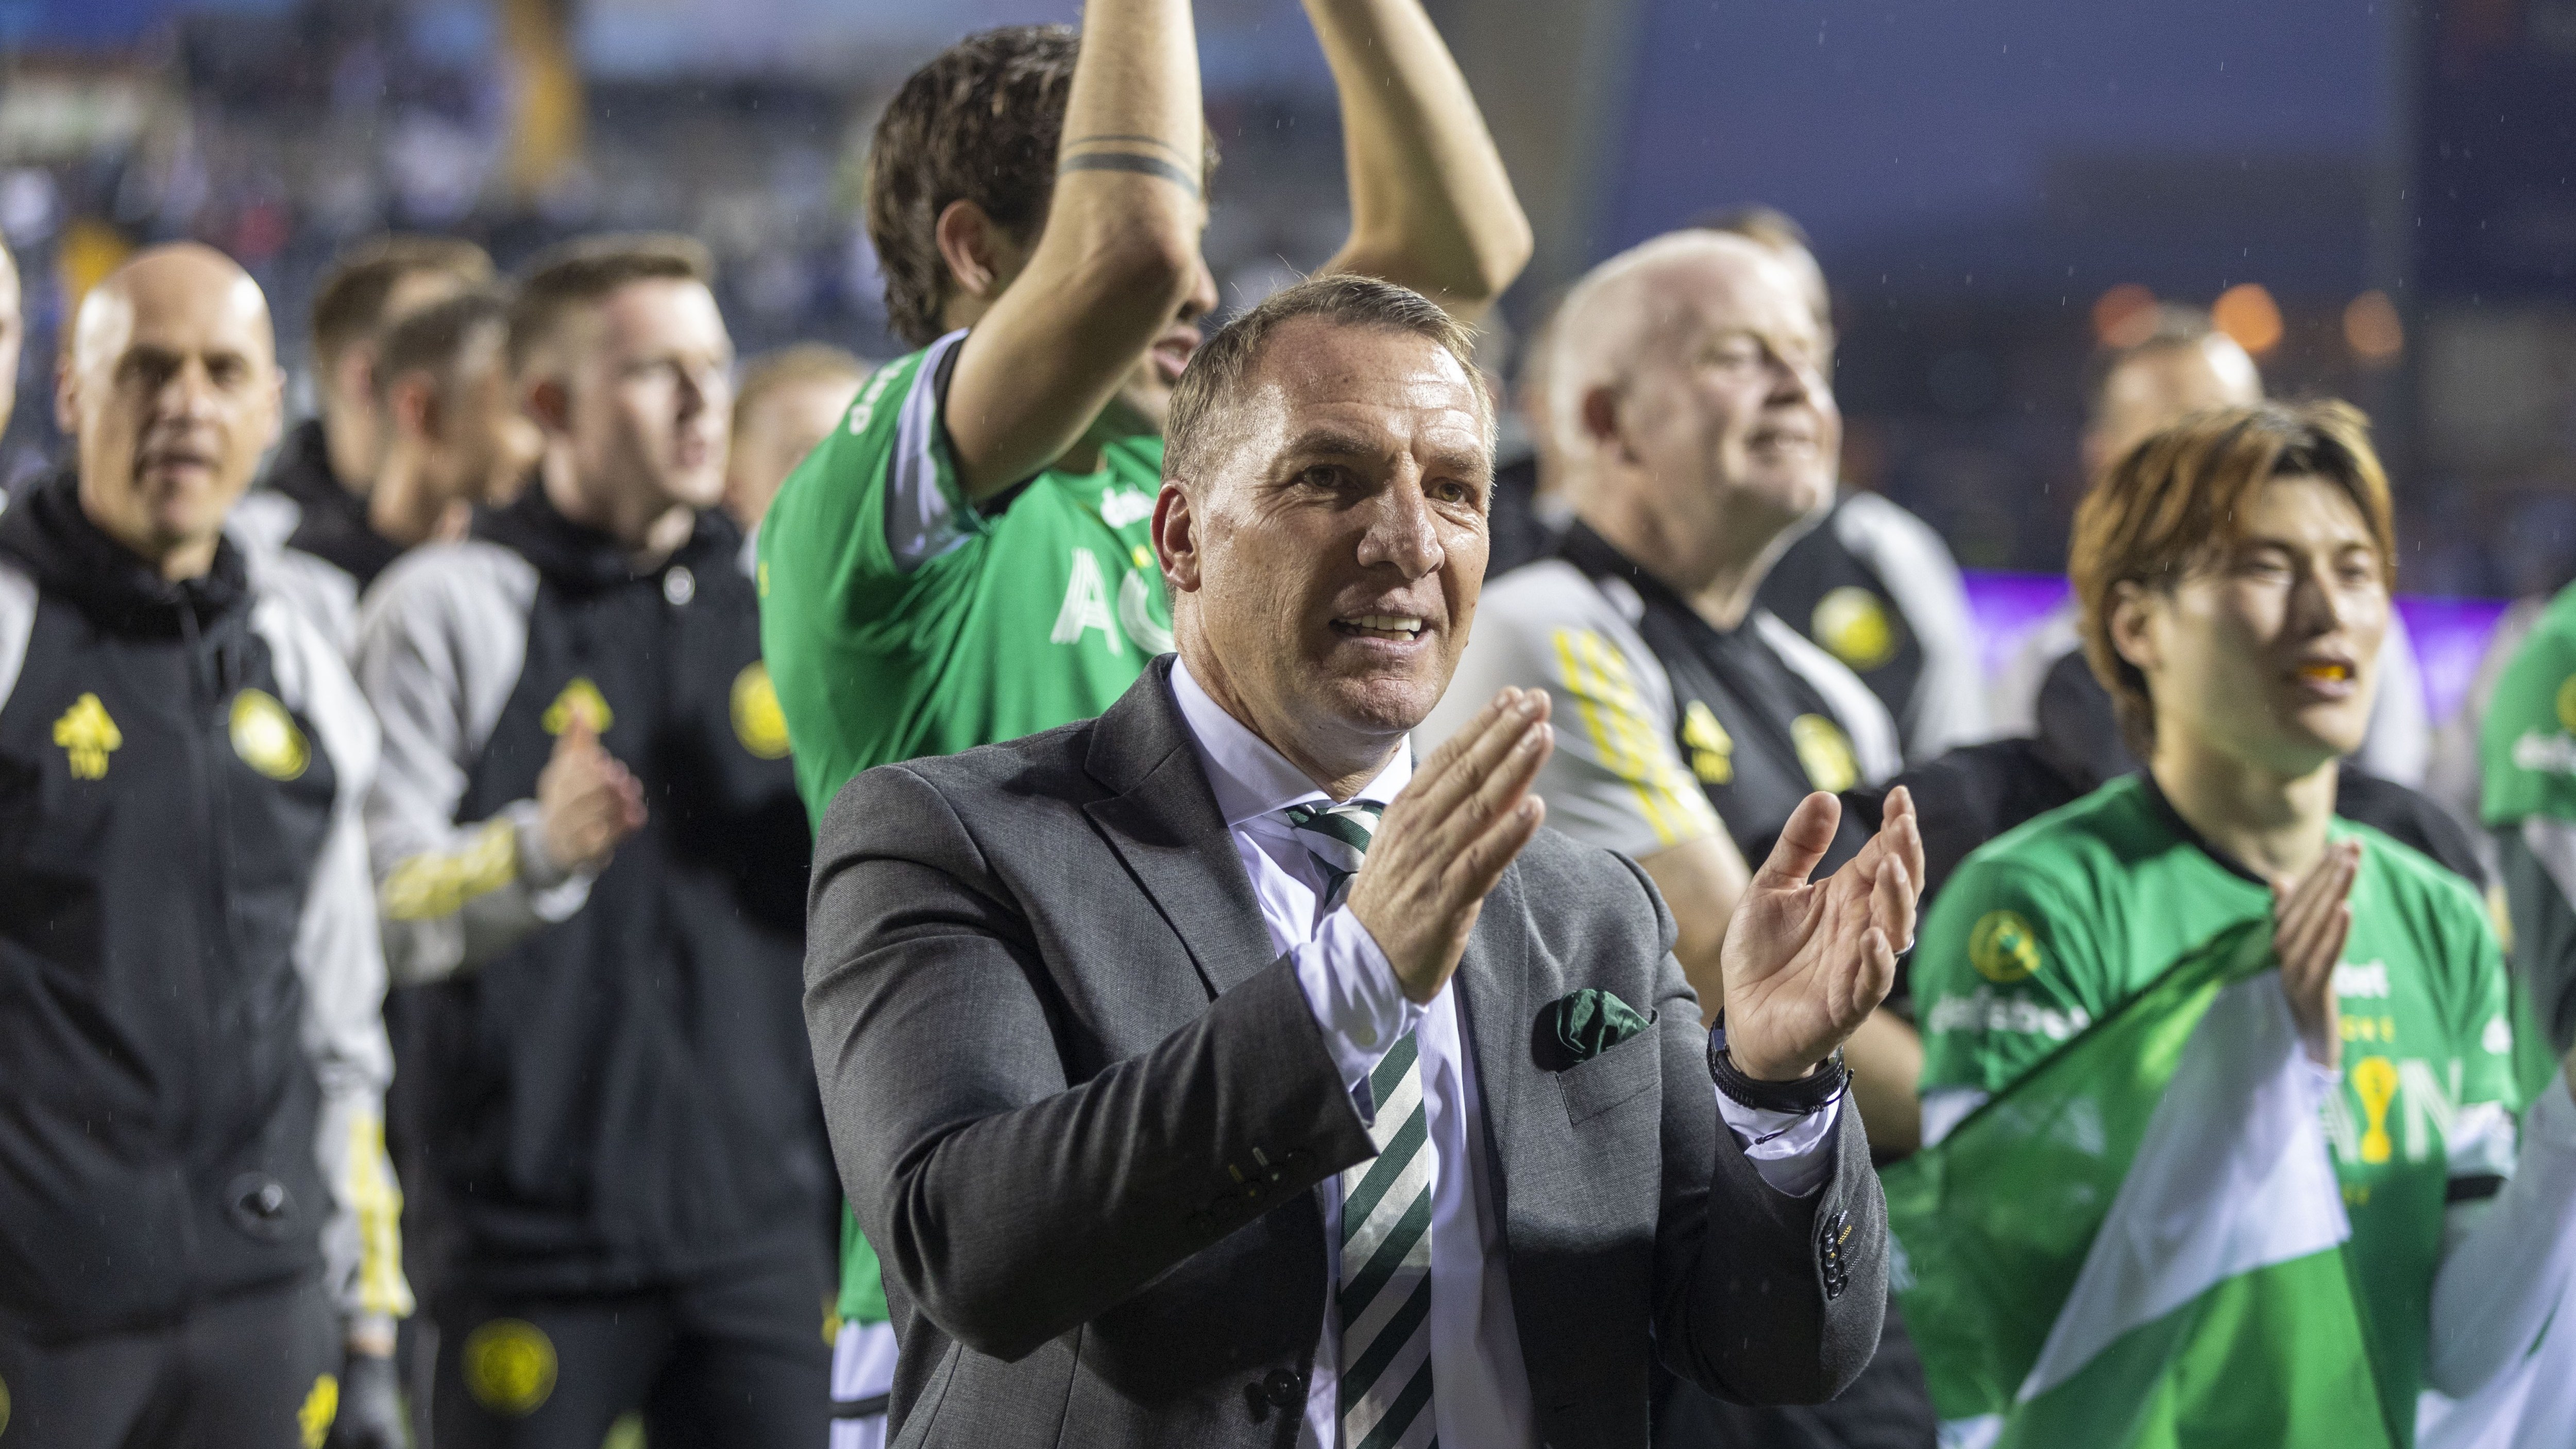 When Rodgers got punchy, his team responded and Celtic galloped to the Premiership finish line